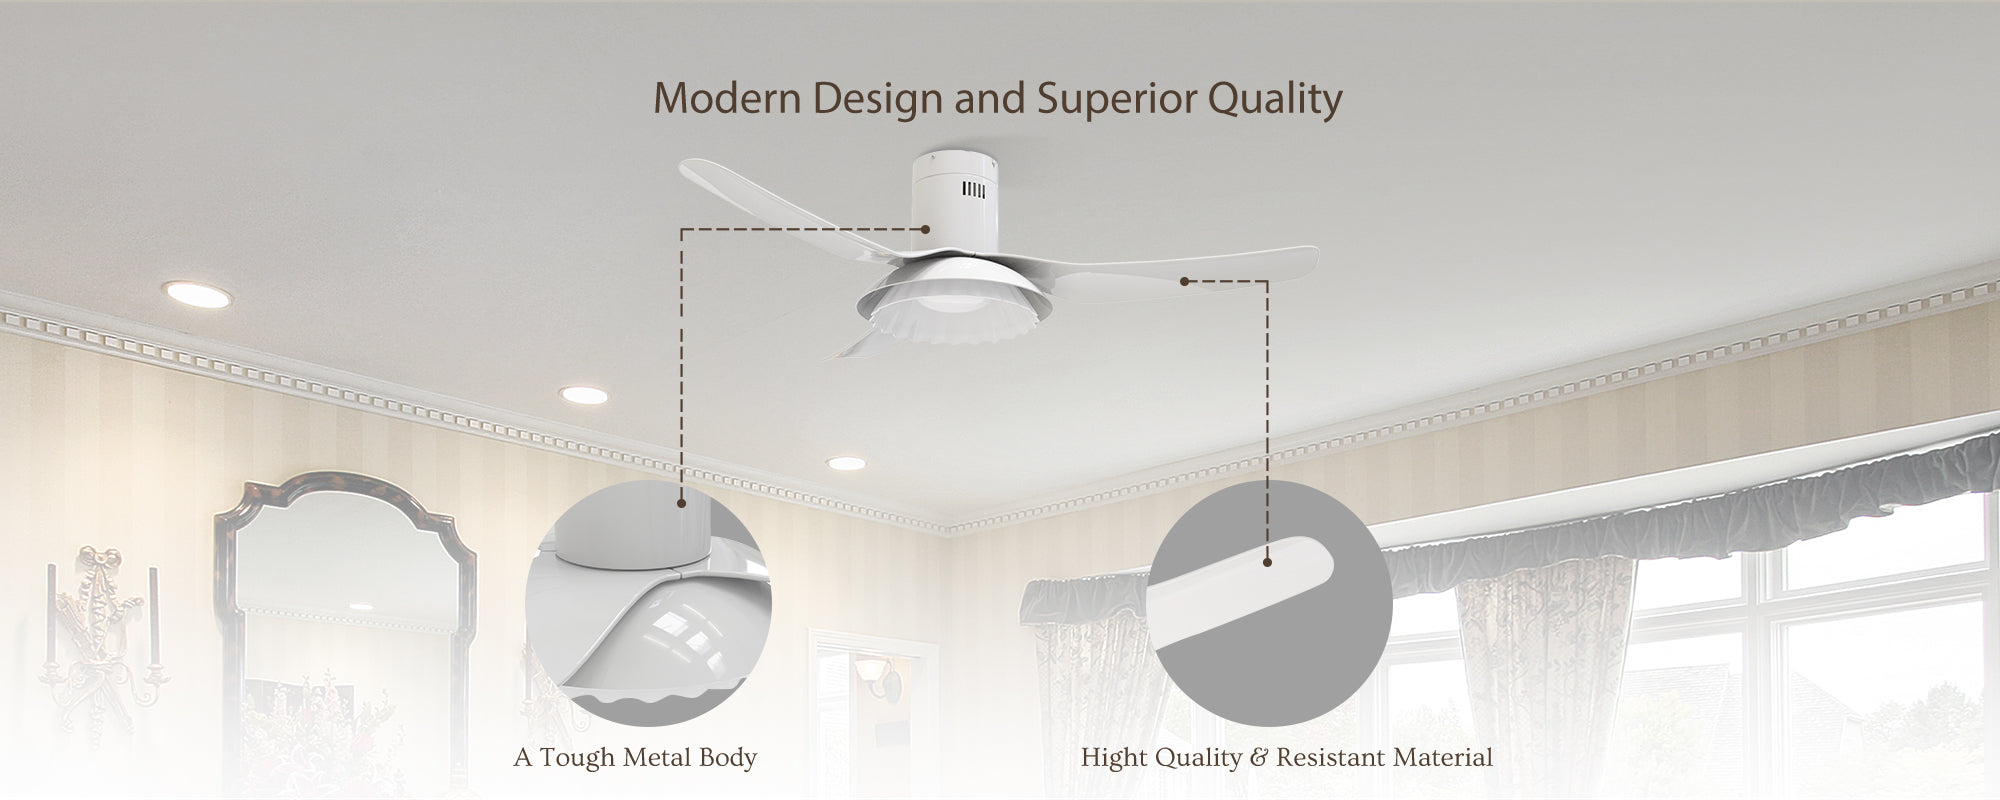 Carro-Smafan-Daisy-Indoor-Outdoor-Smart-Ceiling-Fan-with-Resistant-Material-High-Quality-Design